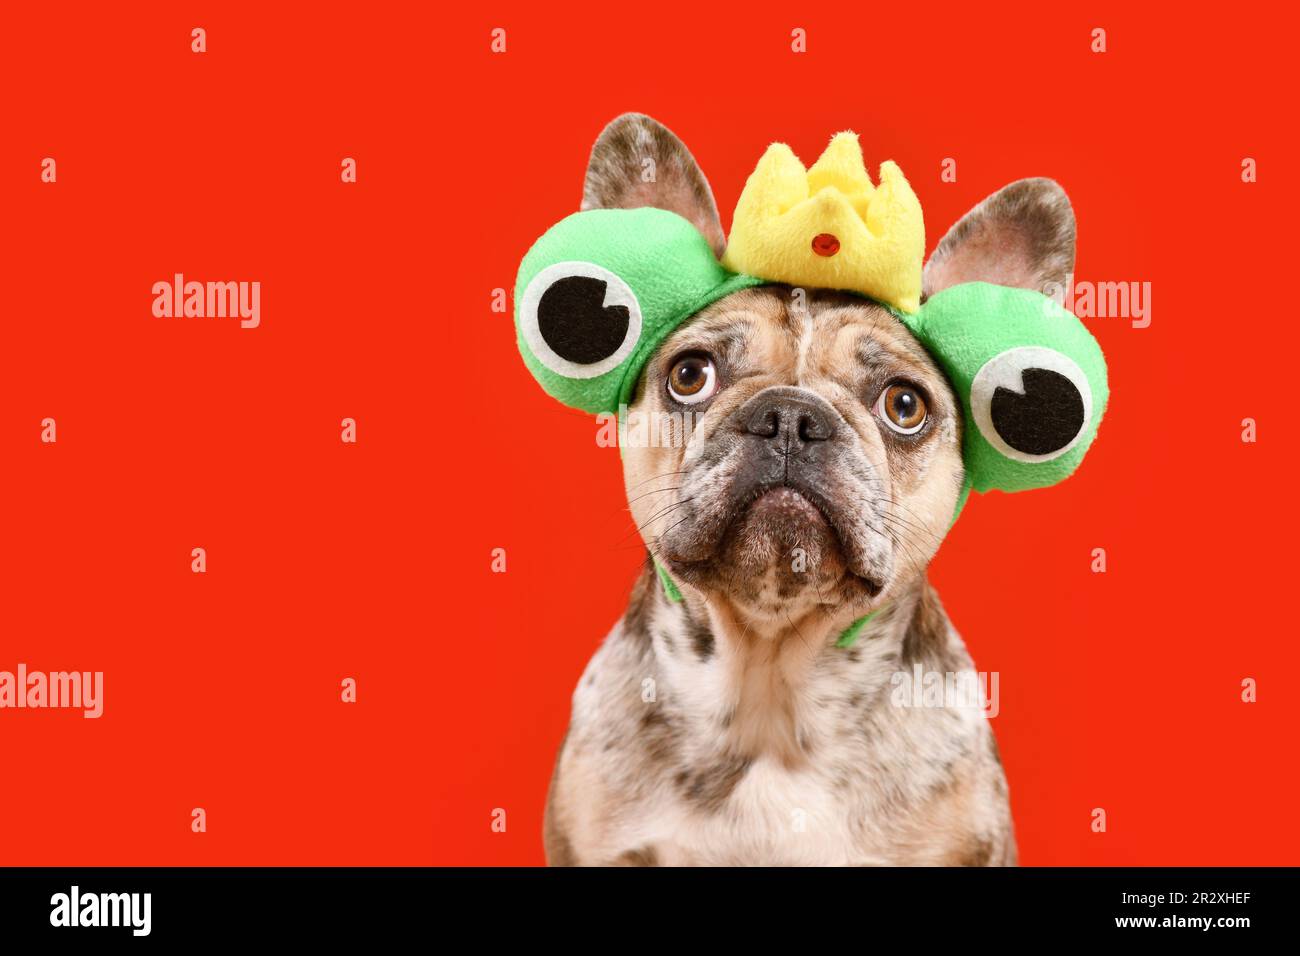 Funny French Bulldog dog wearing frog costume headband with crown and big eyes on red background with copy space Stock Photo